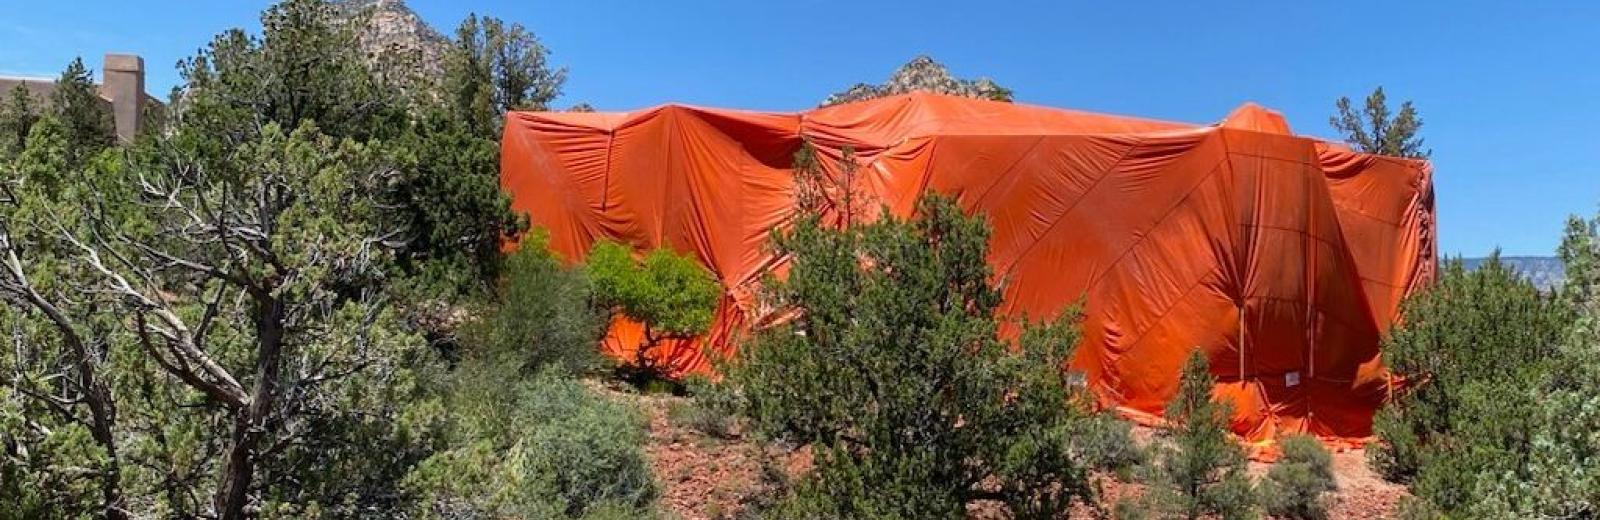 bug wiser fumigation tent over a house